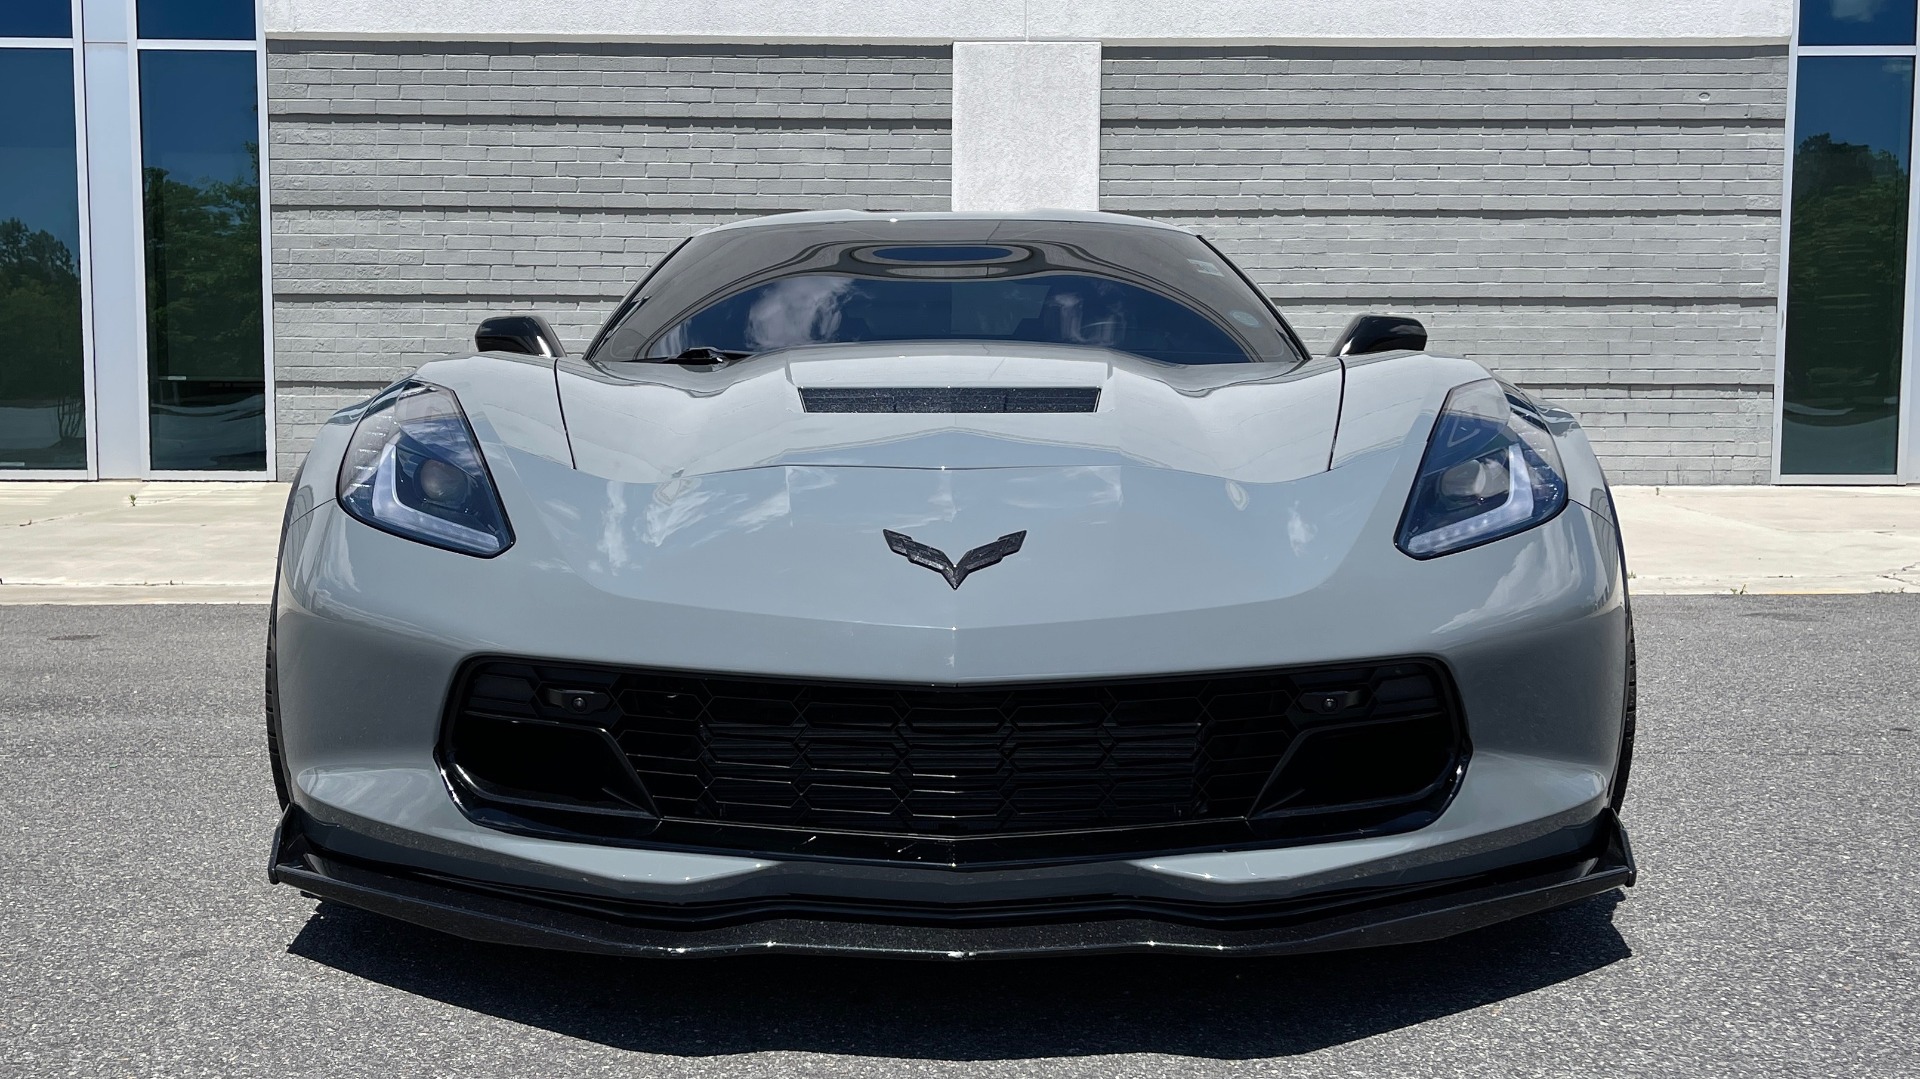 Used 2019 Chevrolet CORVETTE GRAND SPORT 3LT / SUPERCHARGED 6.2L V8 / NAV / REARVIEW for sale Sold at Formula Imports in Charlotte NC 28227 16